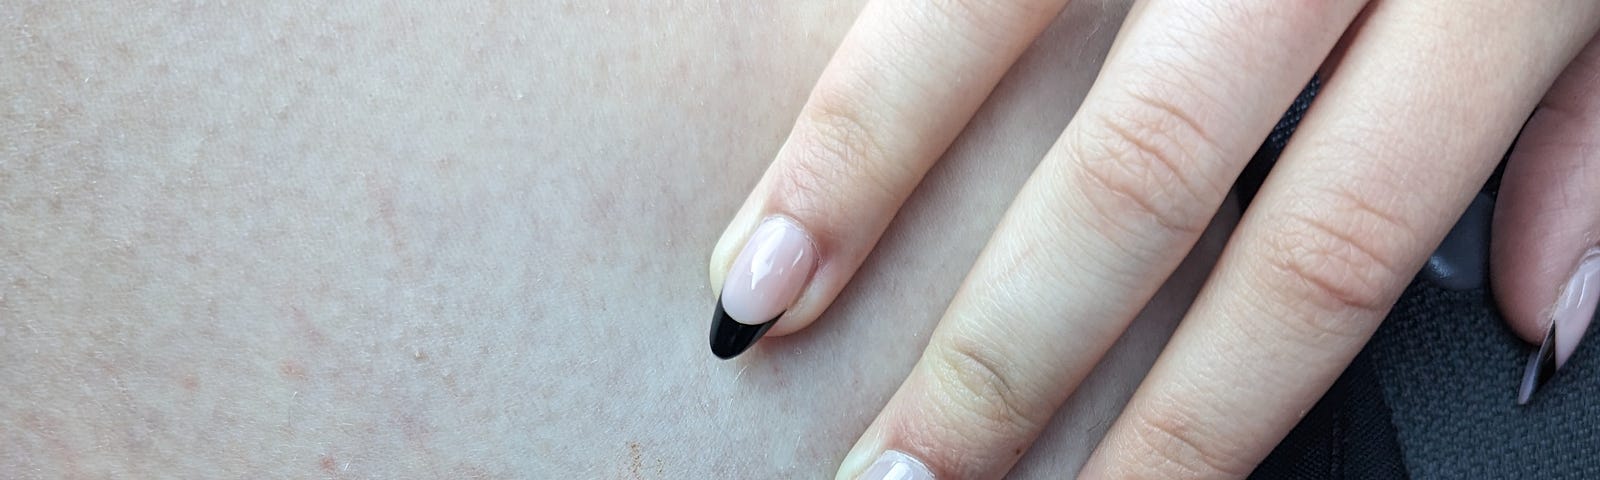 A bloody injury next to manicured nails.